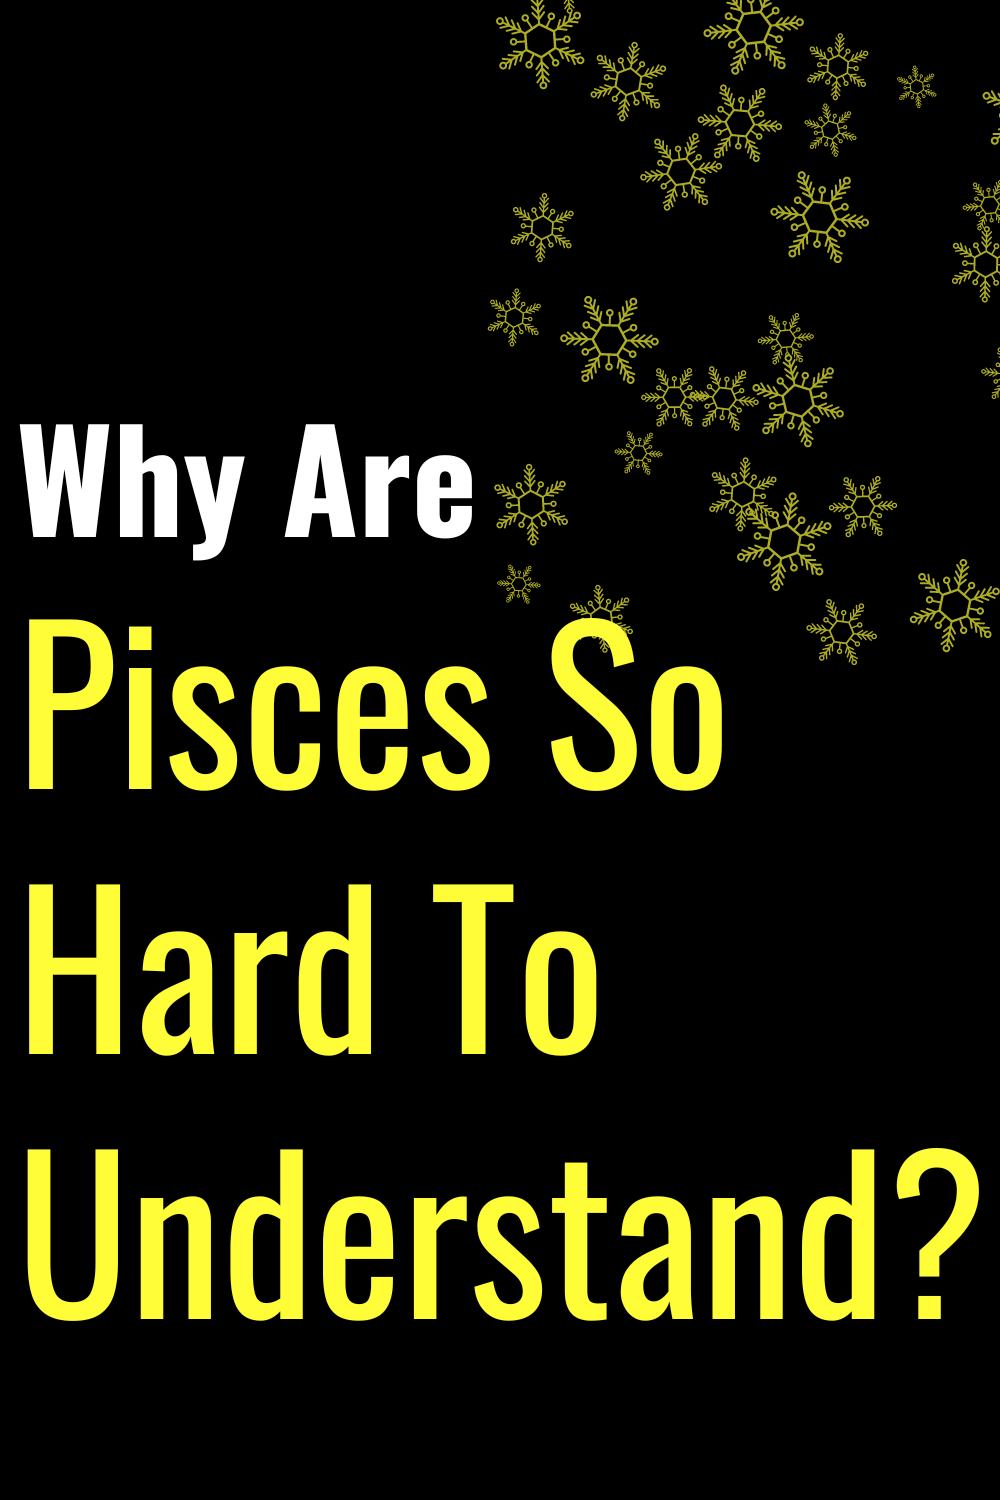 Why Are Pisces So Hard To Understand?